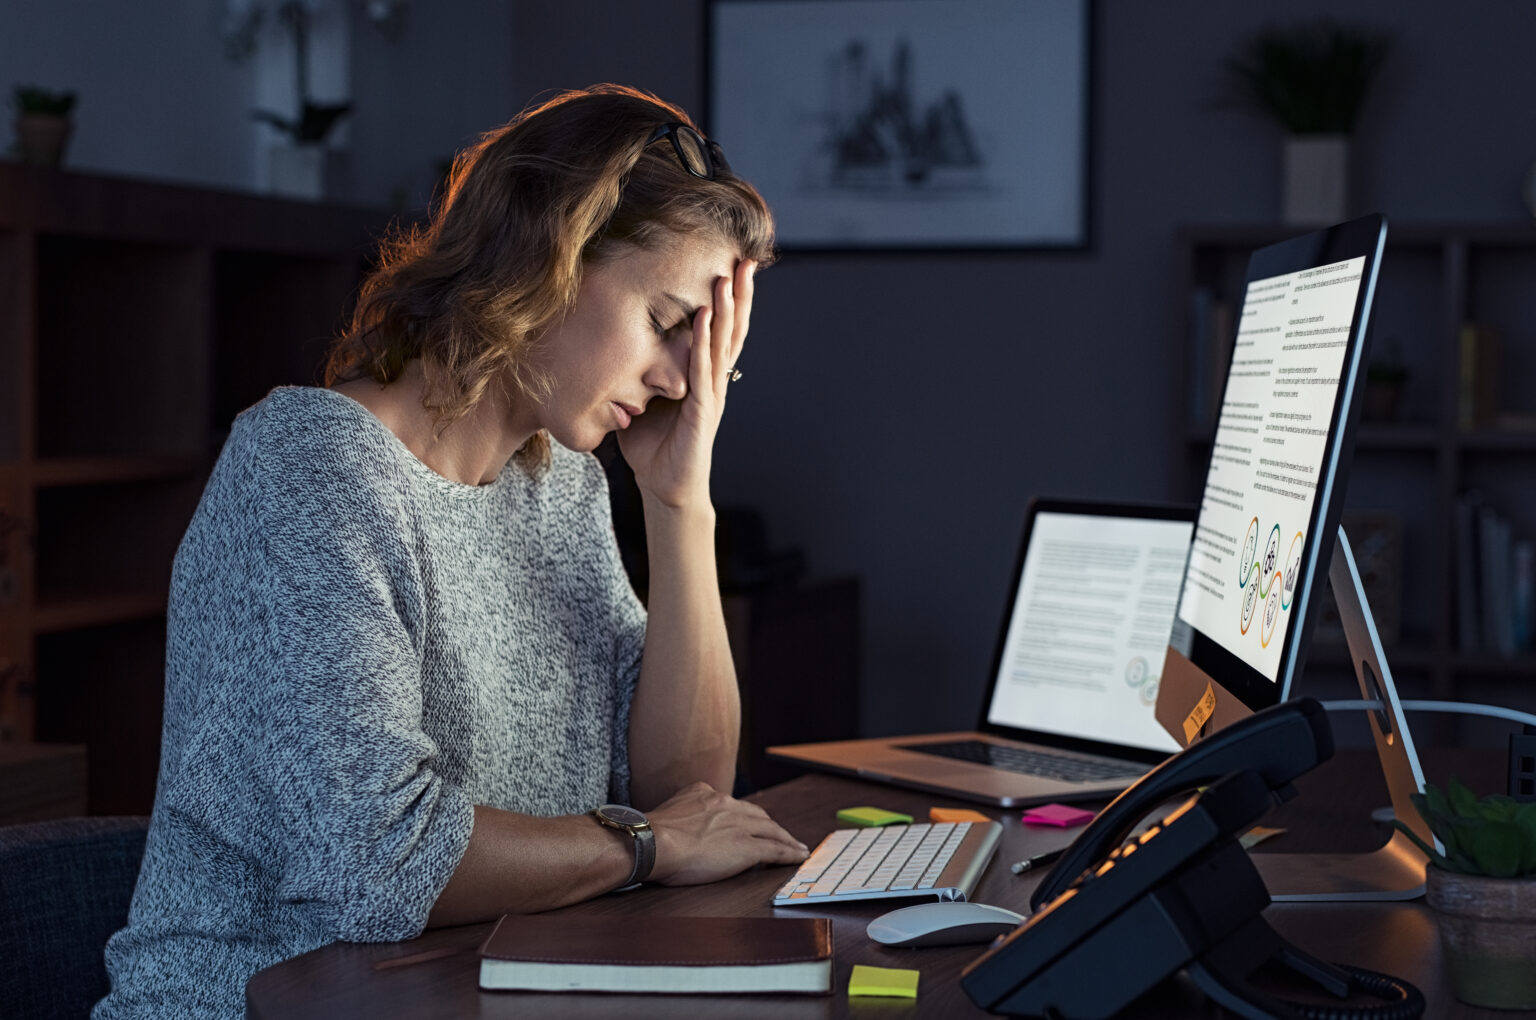 Woman looking stressed at computer due to high levels of burnout in the workplace